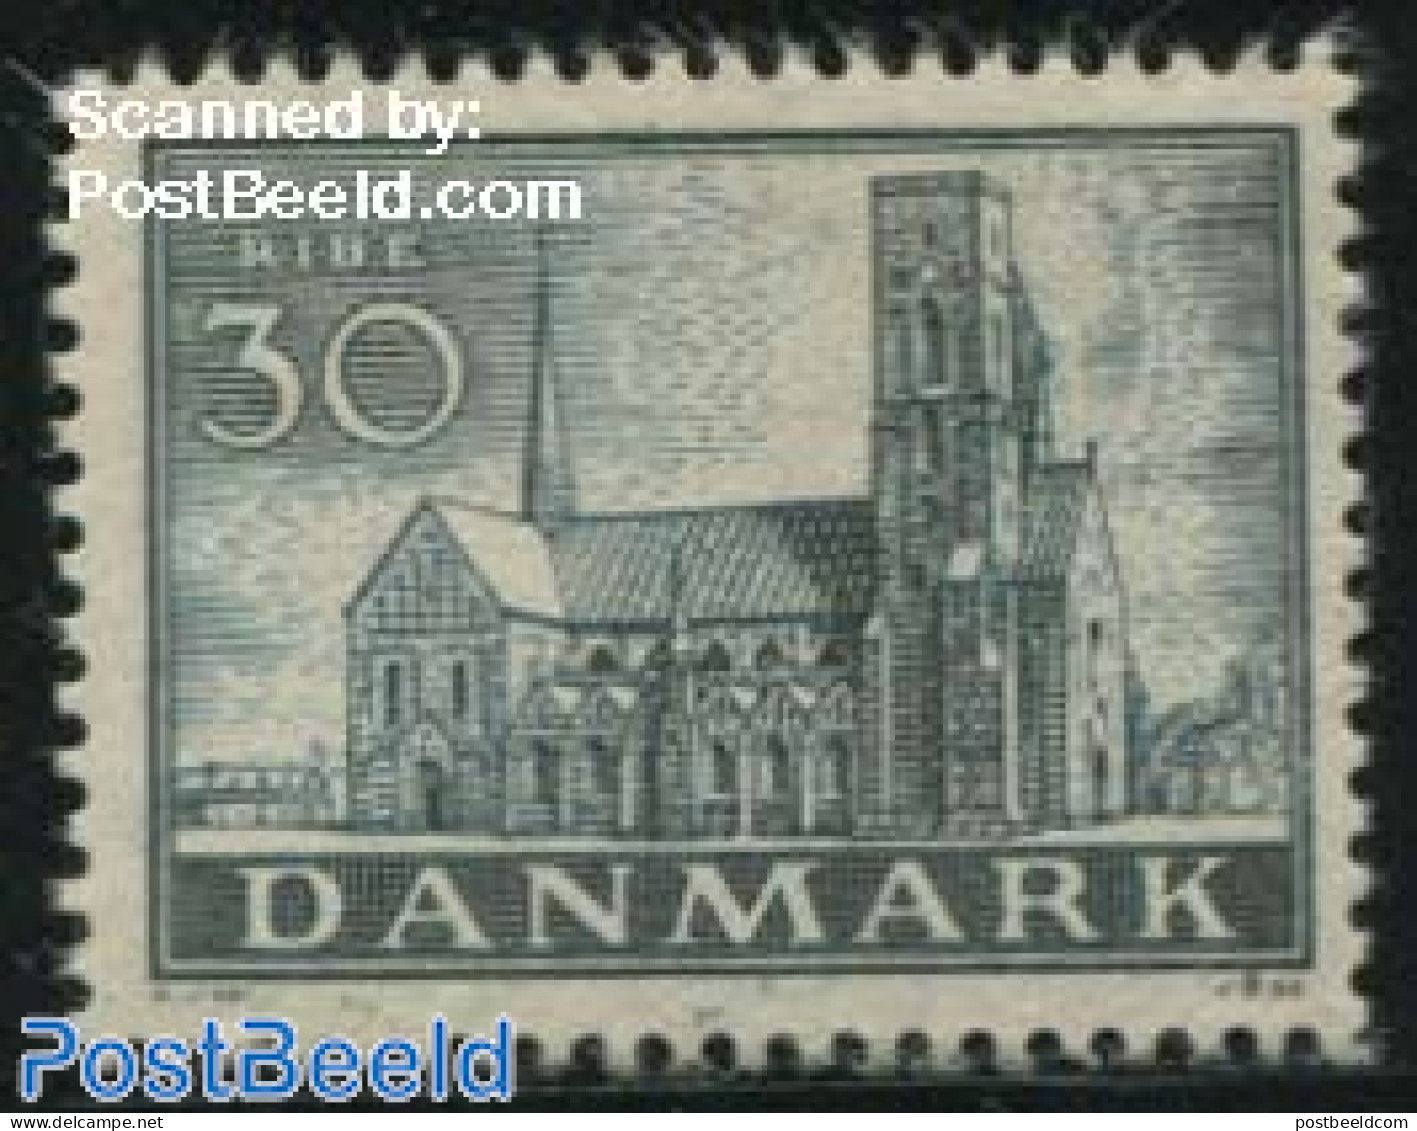 Denmark 1936 30o, Stamp Out Of Set, Mint NH, Religion - Churches, Temples, Mosques, Synagogues - Ungebraucht